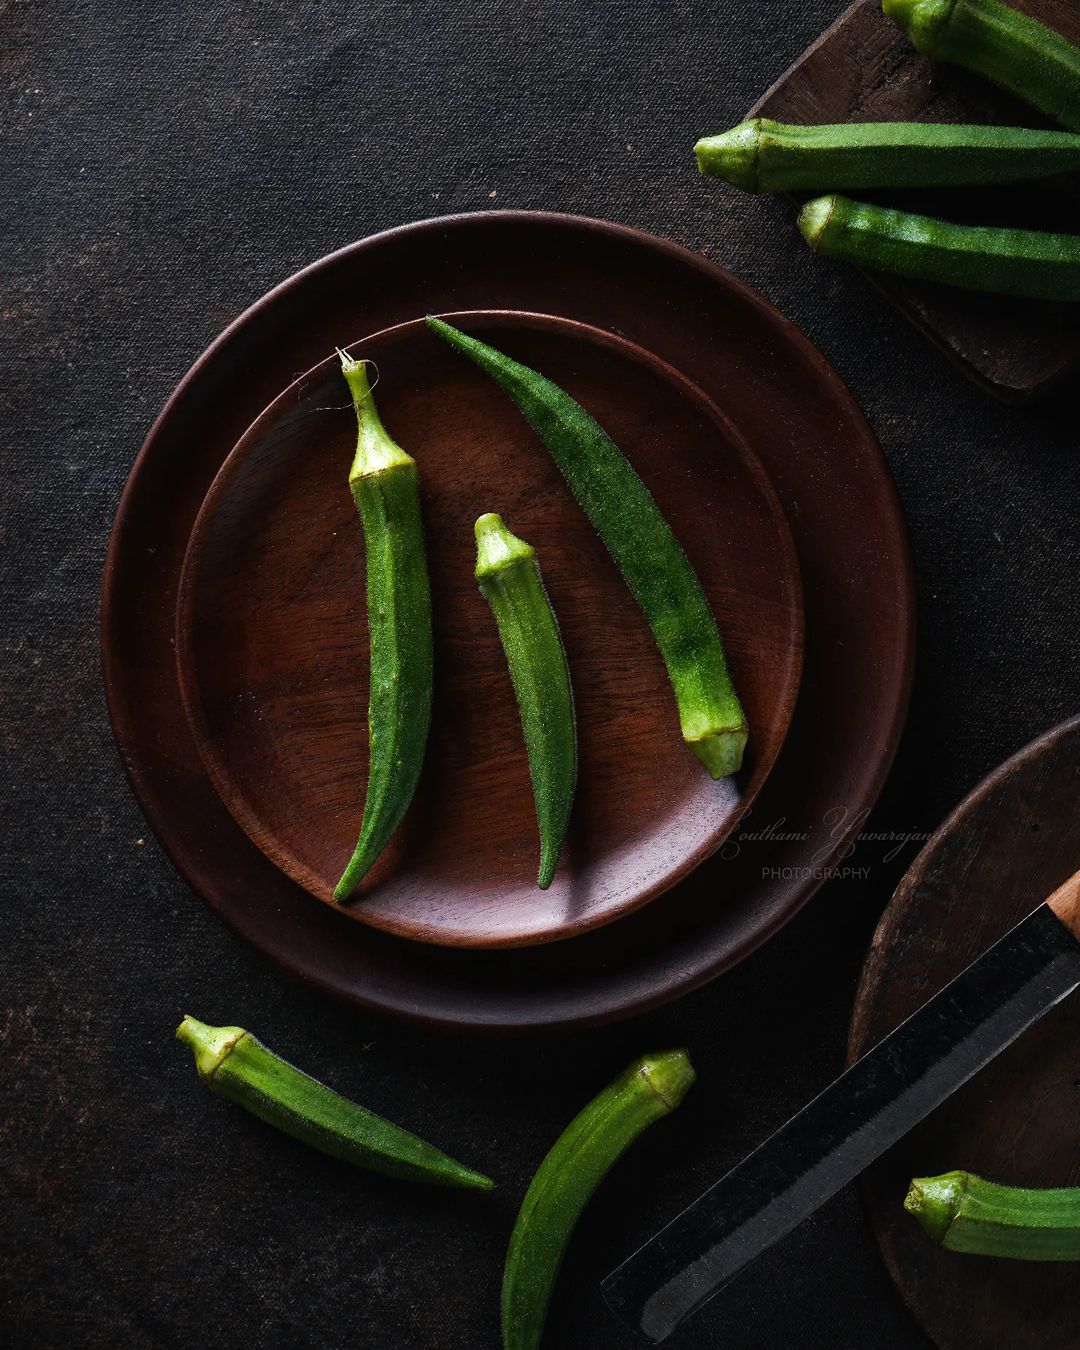 Okra is a nutritious fruit famously used in Southern dishes throughout the years